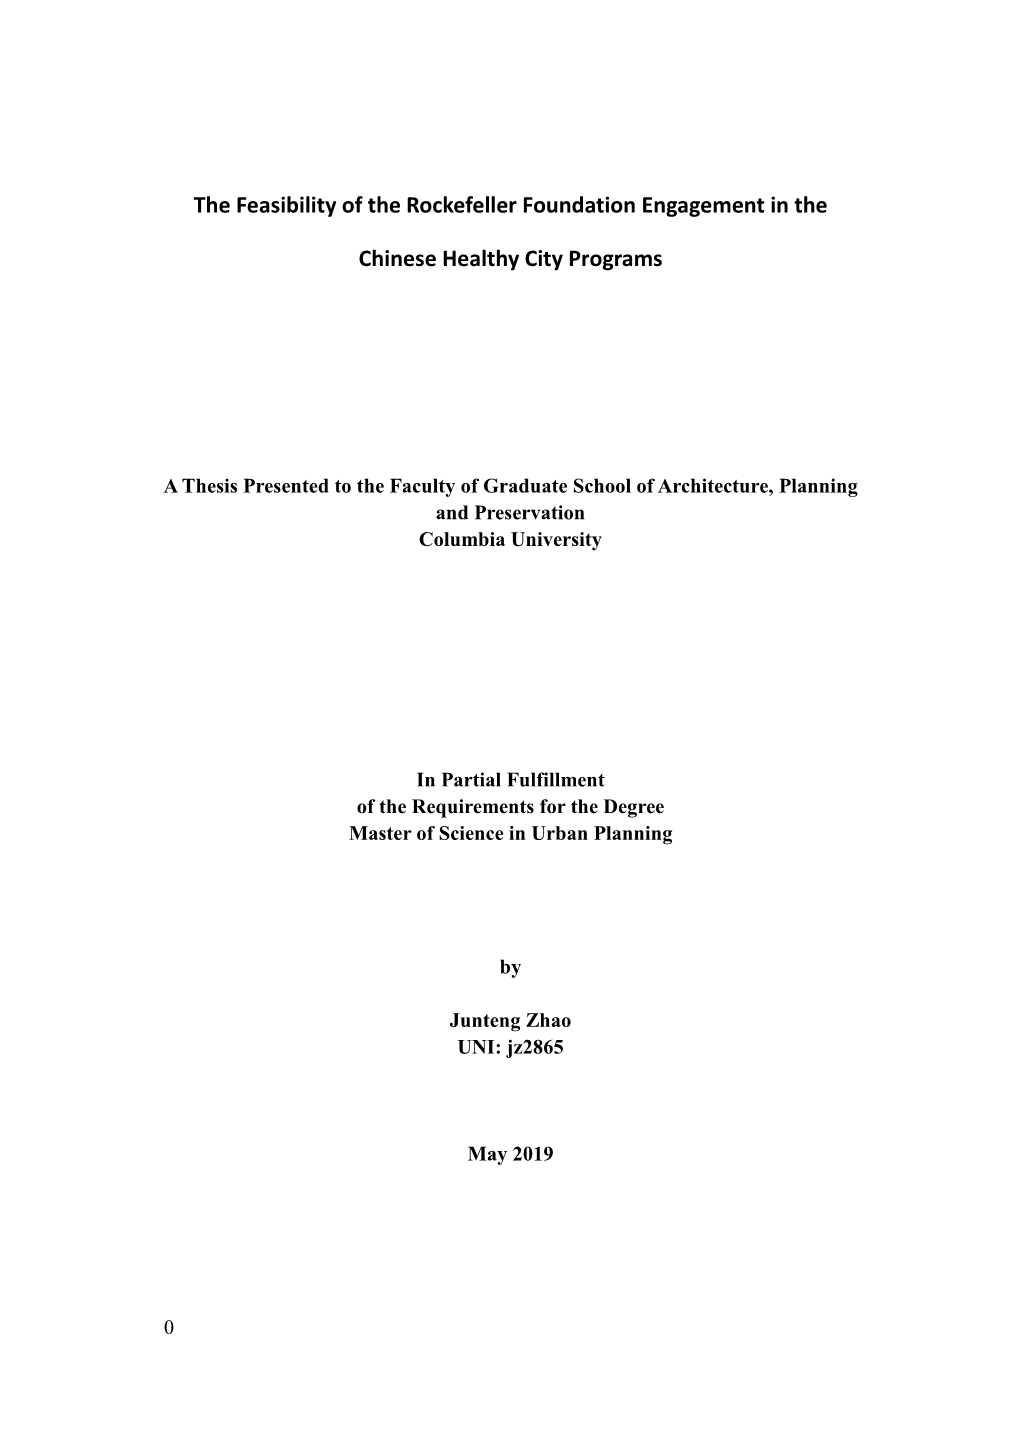 The Feasibility of the Rockefeller Foundation Engagement in Chinese Healthy City Programs